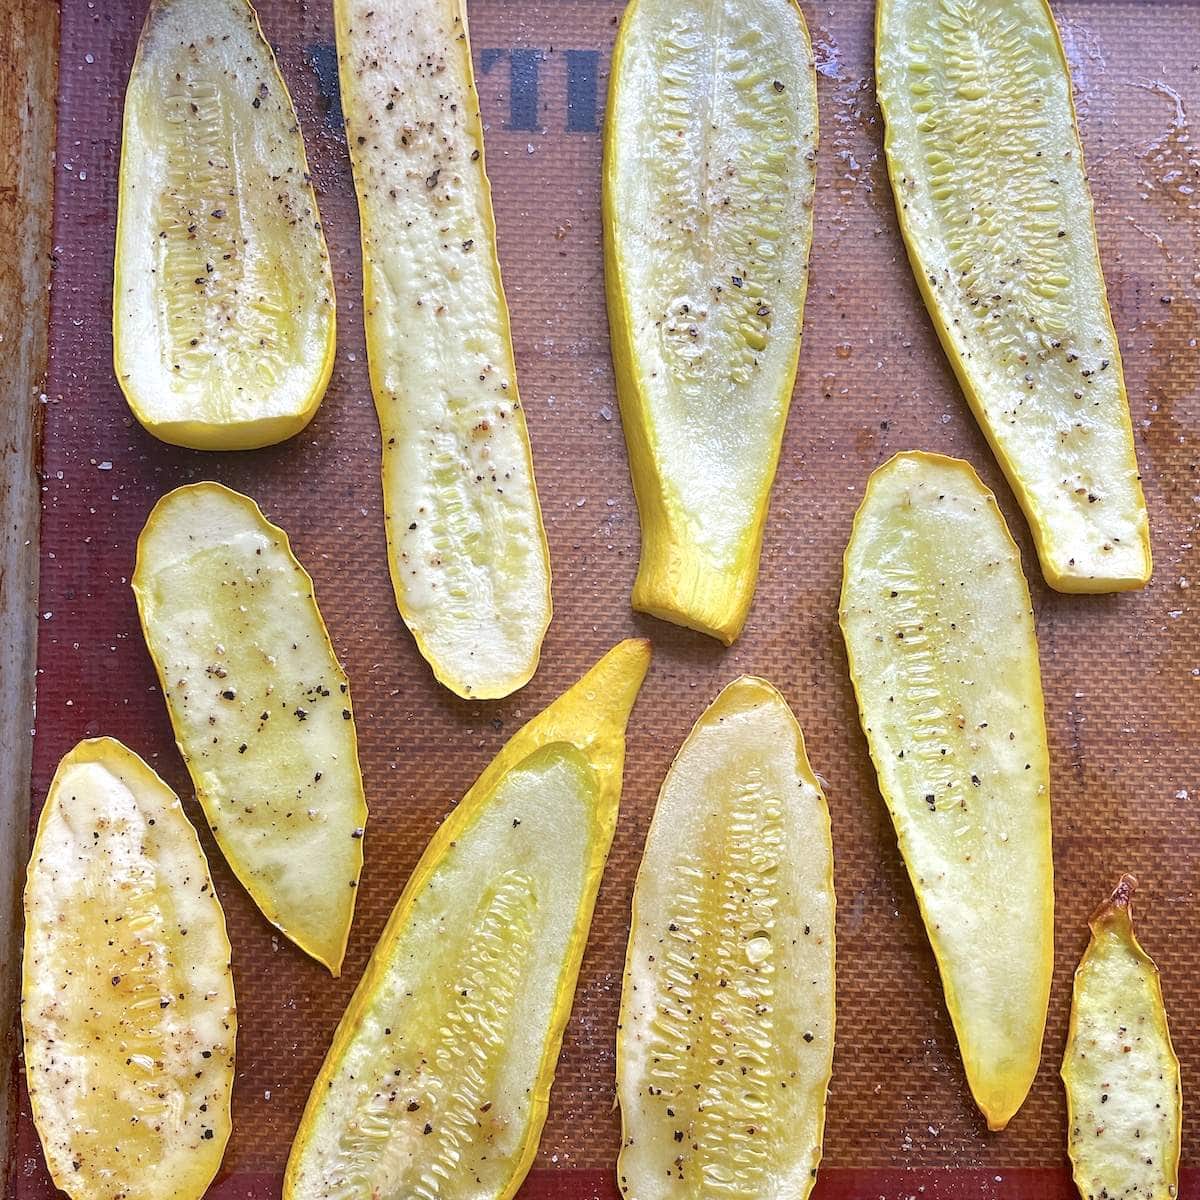 Oven roasted yellow squash strips on a lined baking sheet.